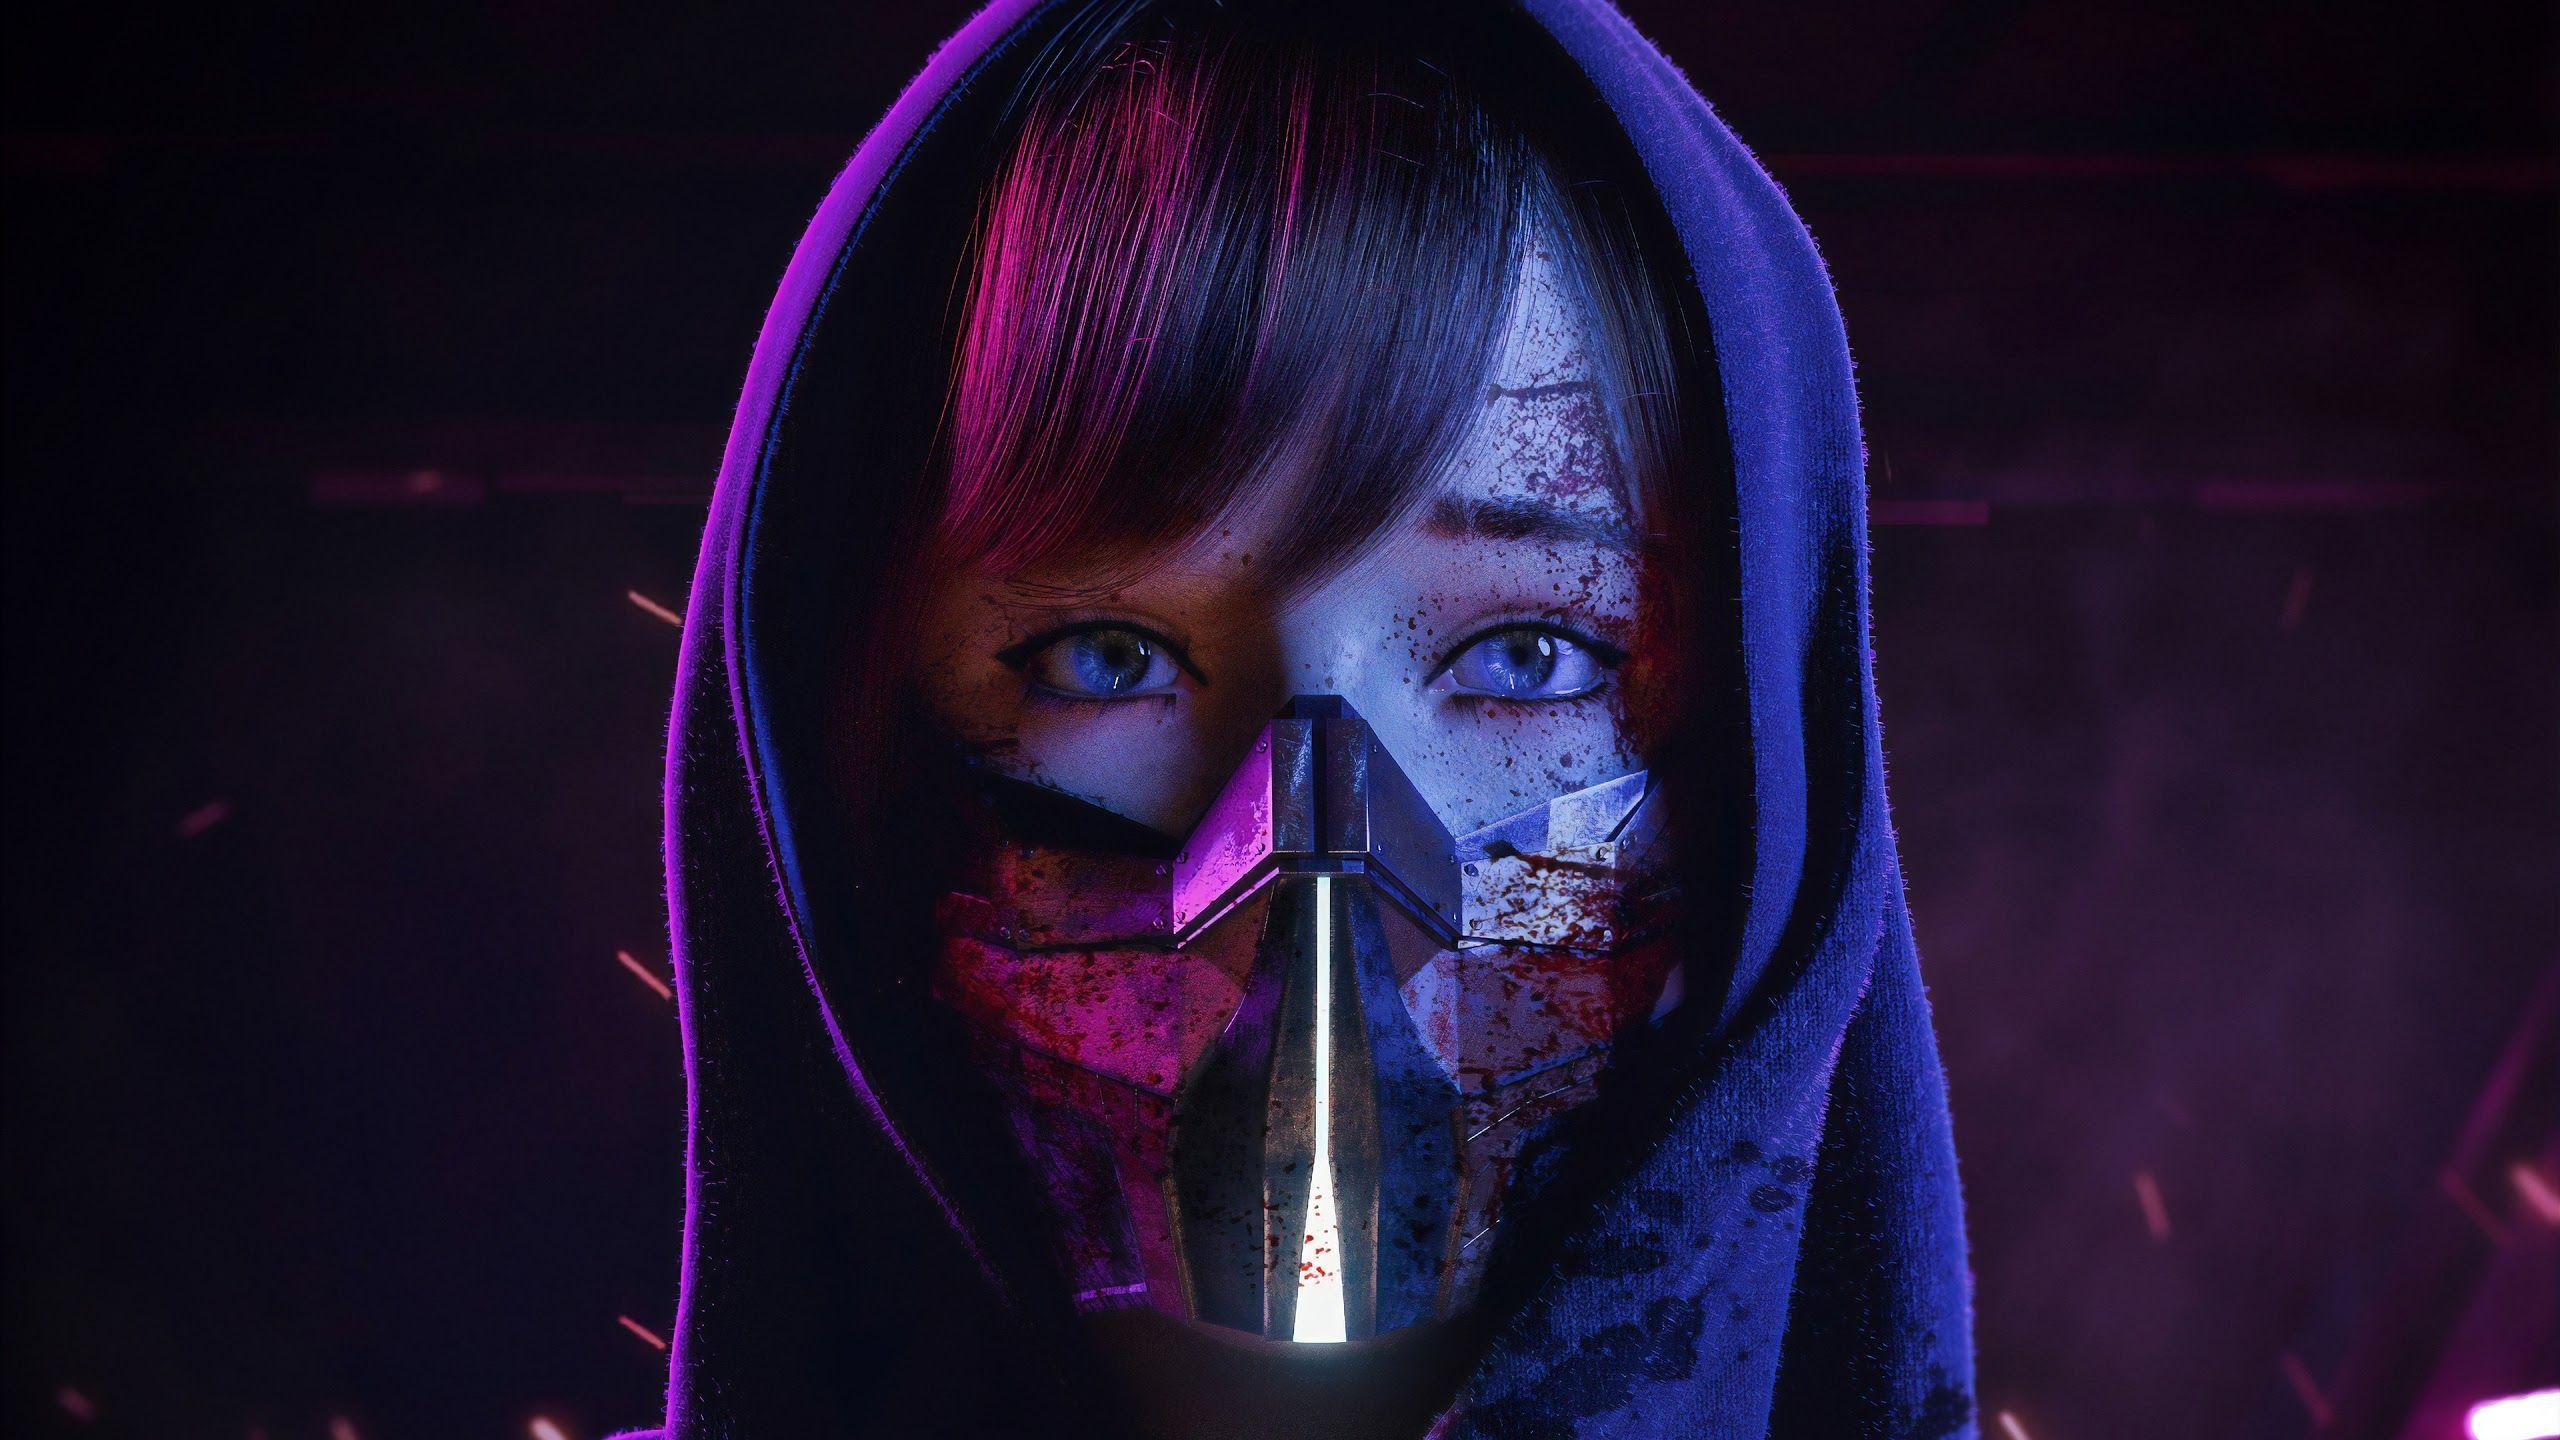 Cool Girls With Mask wallpapers collection